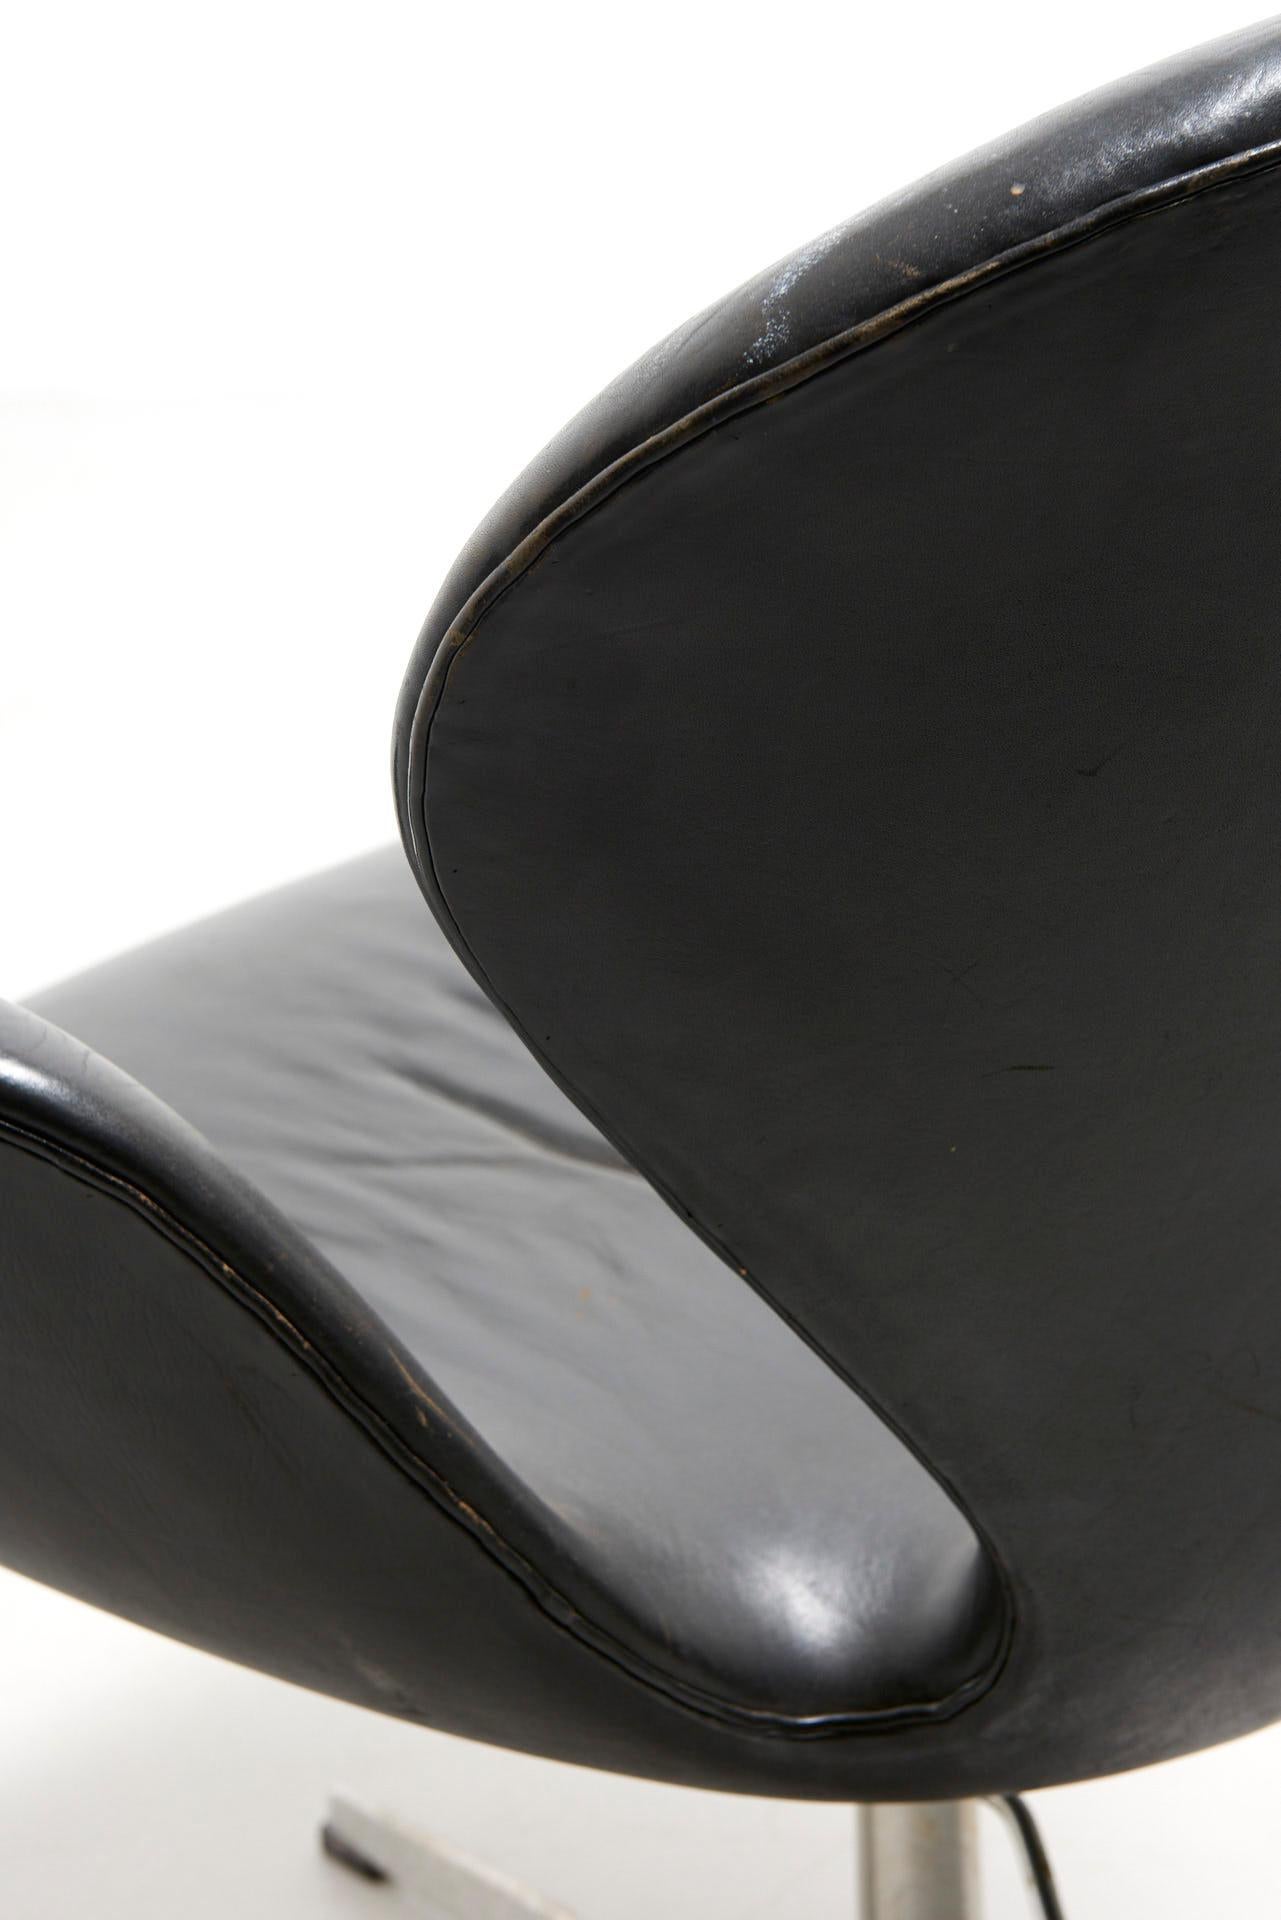 Early Swan Chair in Black Leather, Arne Jacobsen In Good Condition For Sale In Antwerpen, BE